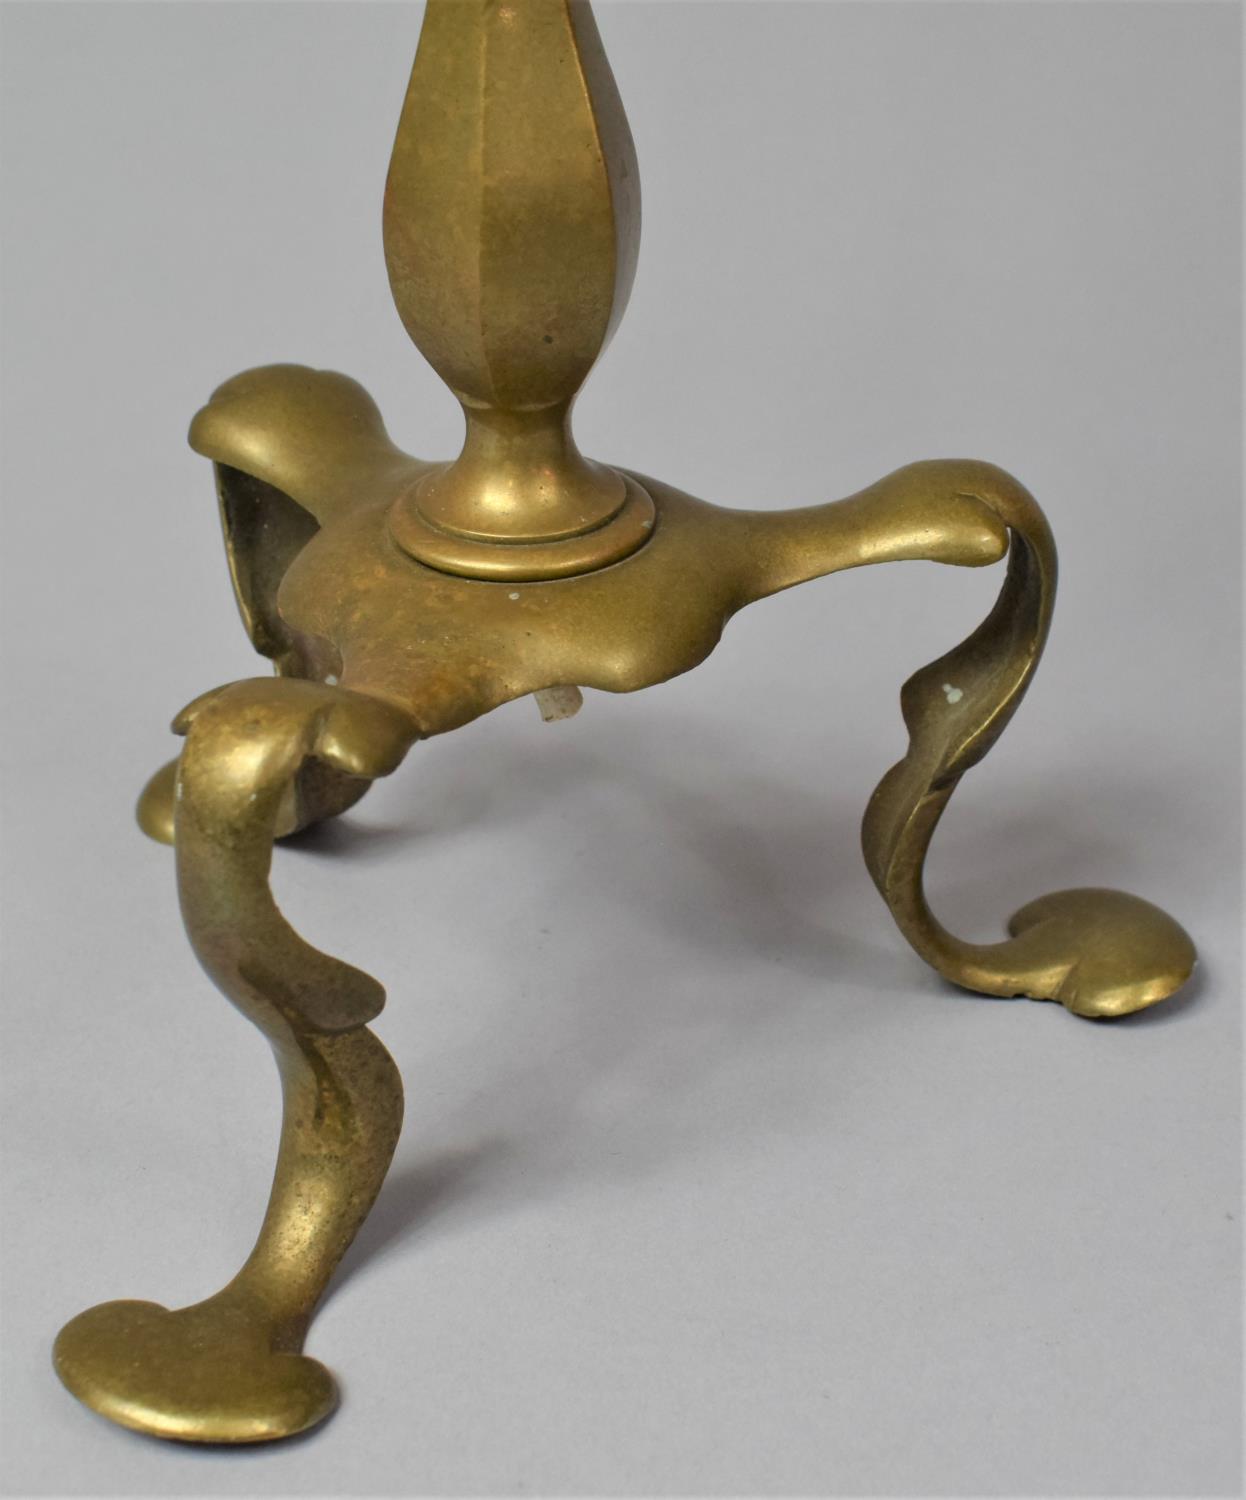 An Early 20th Century Brass Pullman Carriage Table Lamp, with Three Scrolled Feet, 32cm high - Image 3 of 4